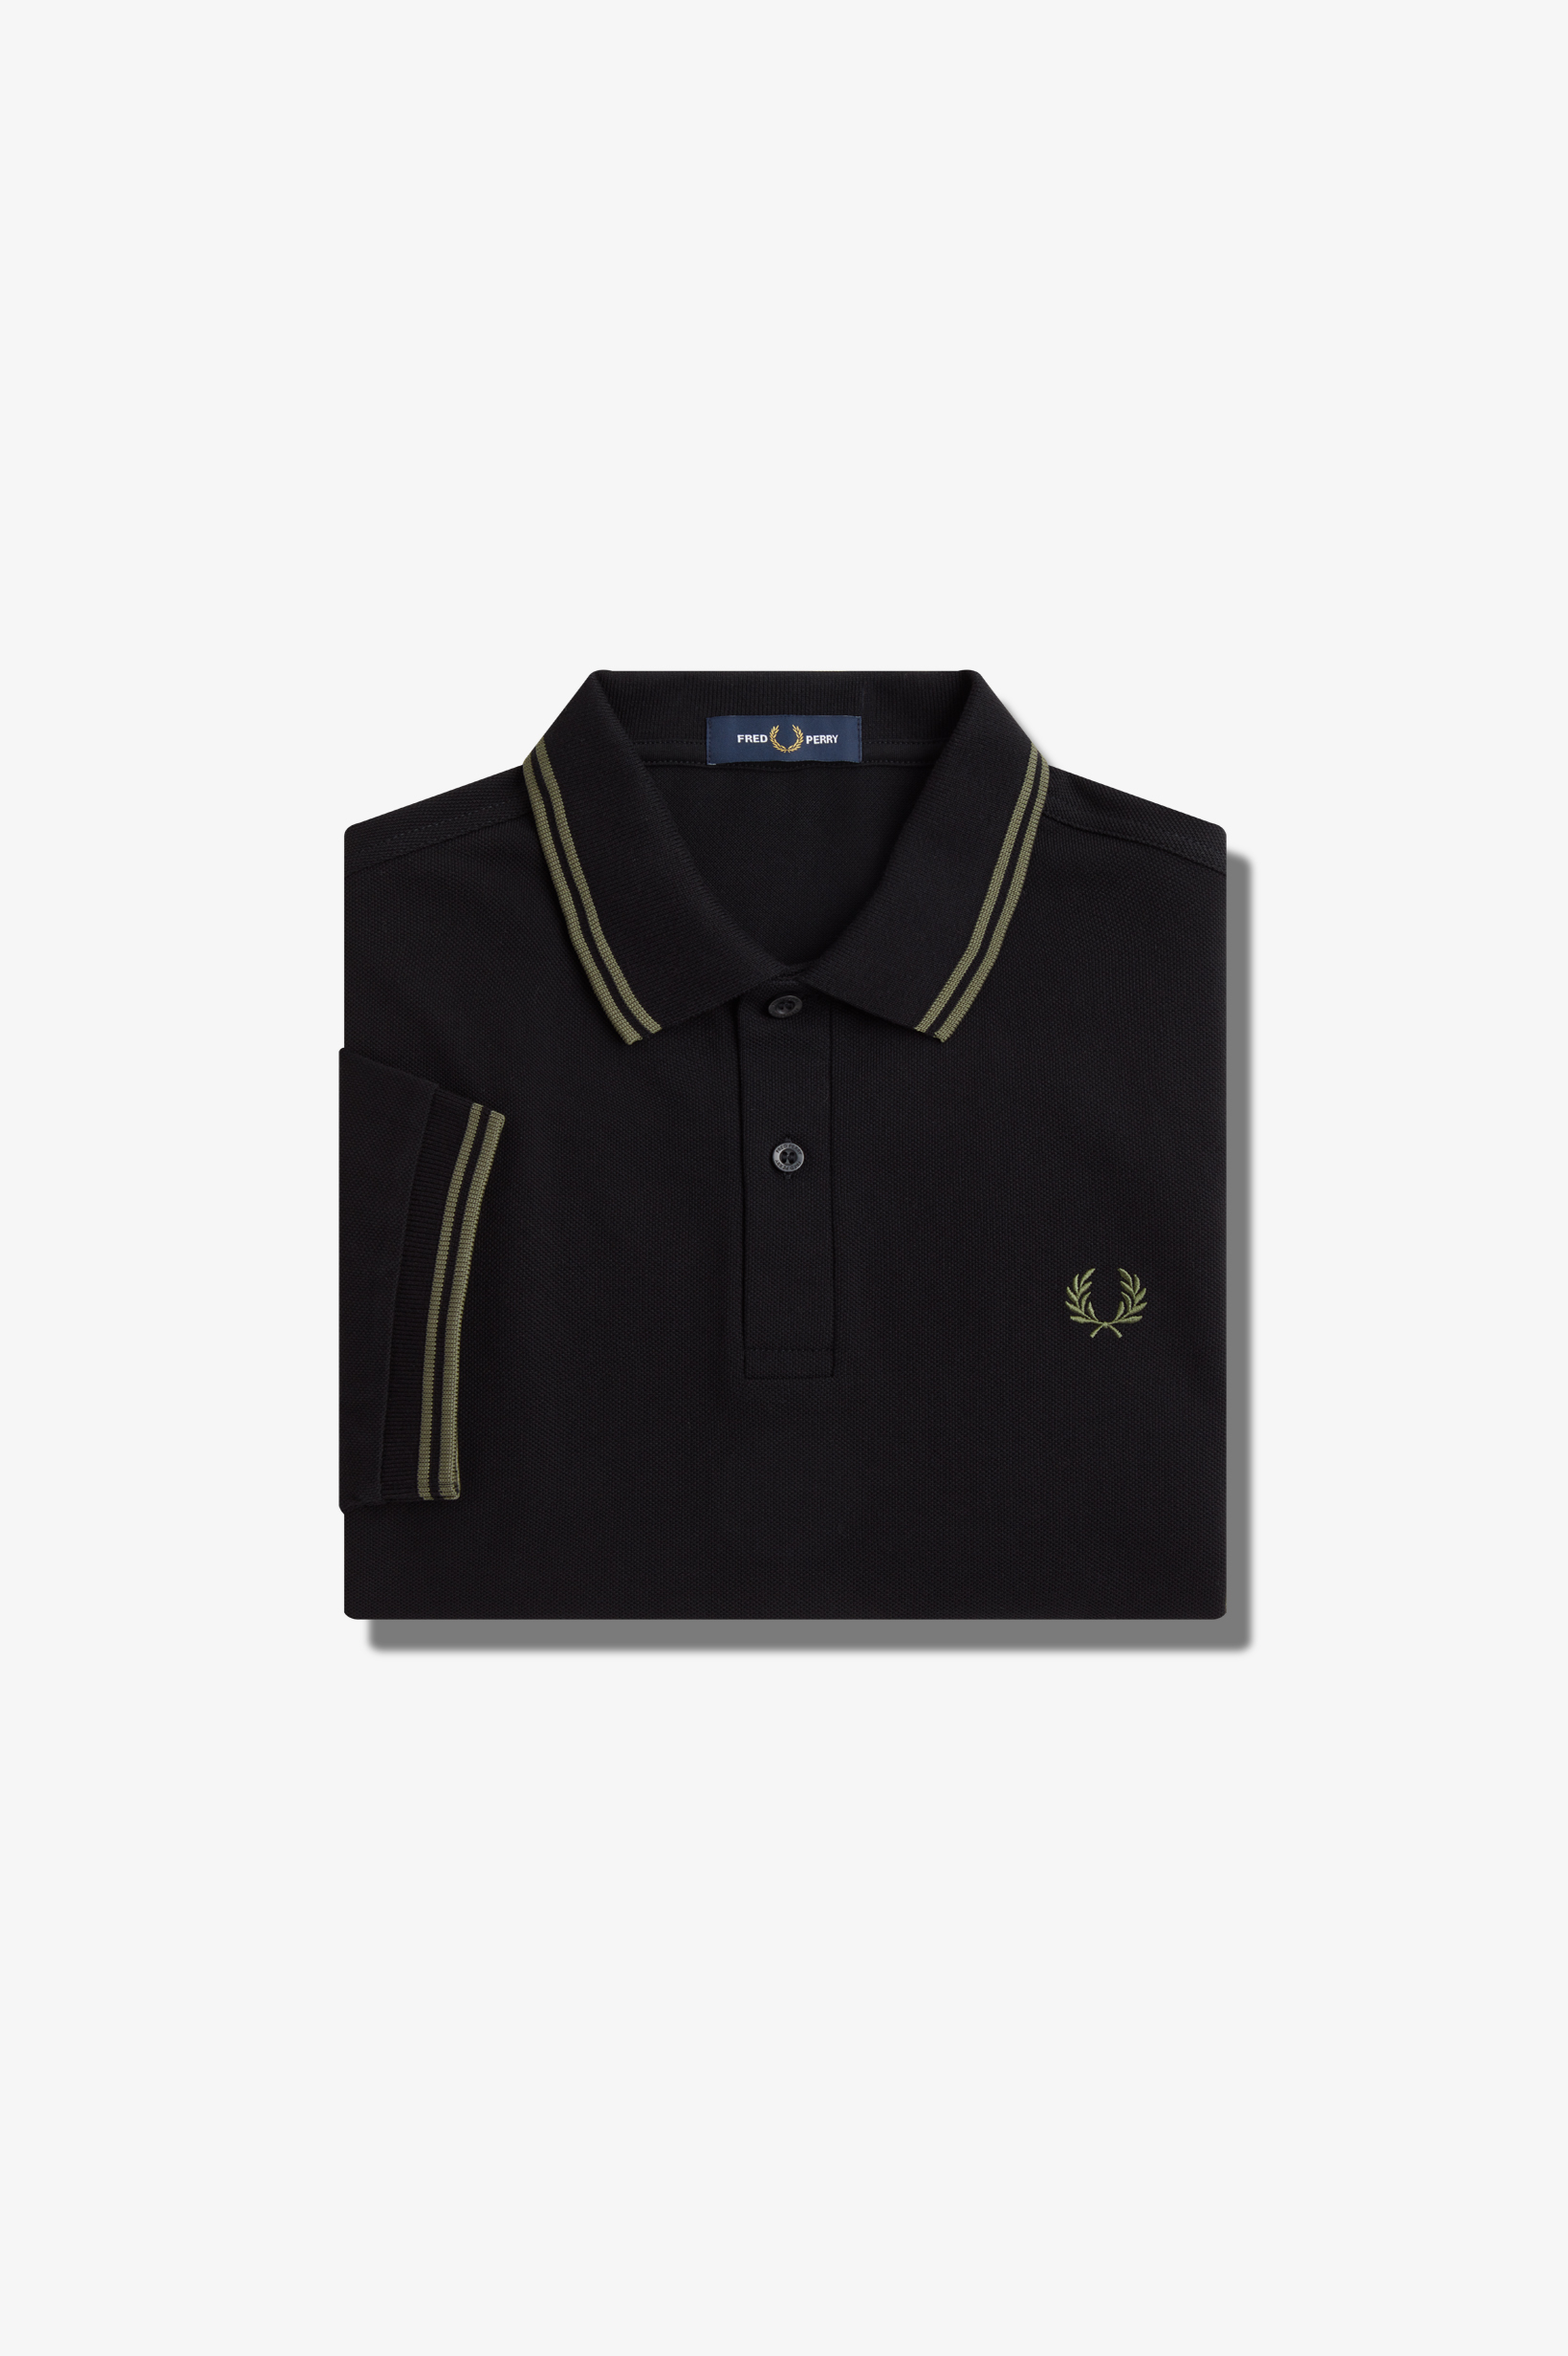 Fred Perry - TWIN TIPPED POLO SHIRT - Black/Field Green